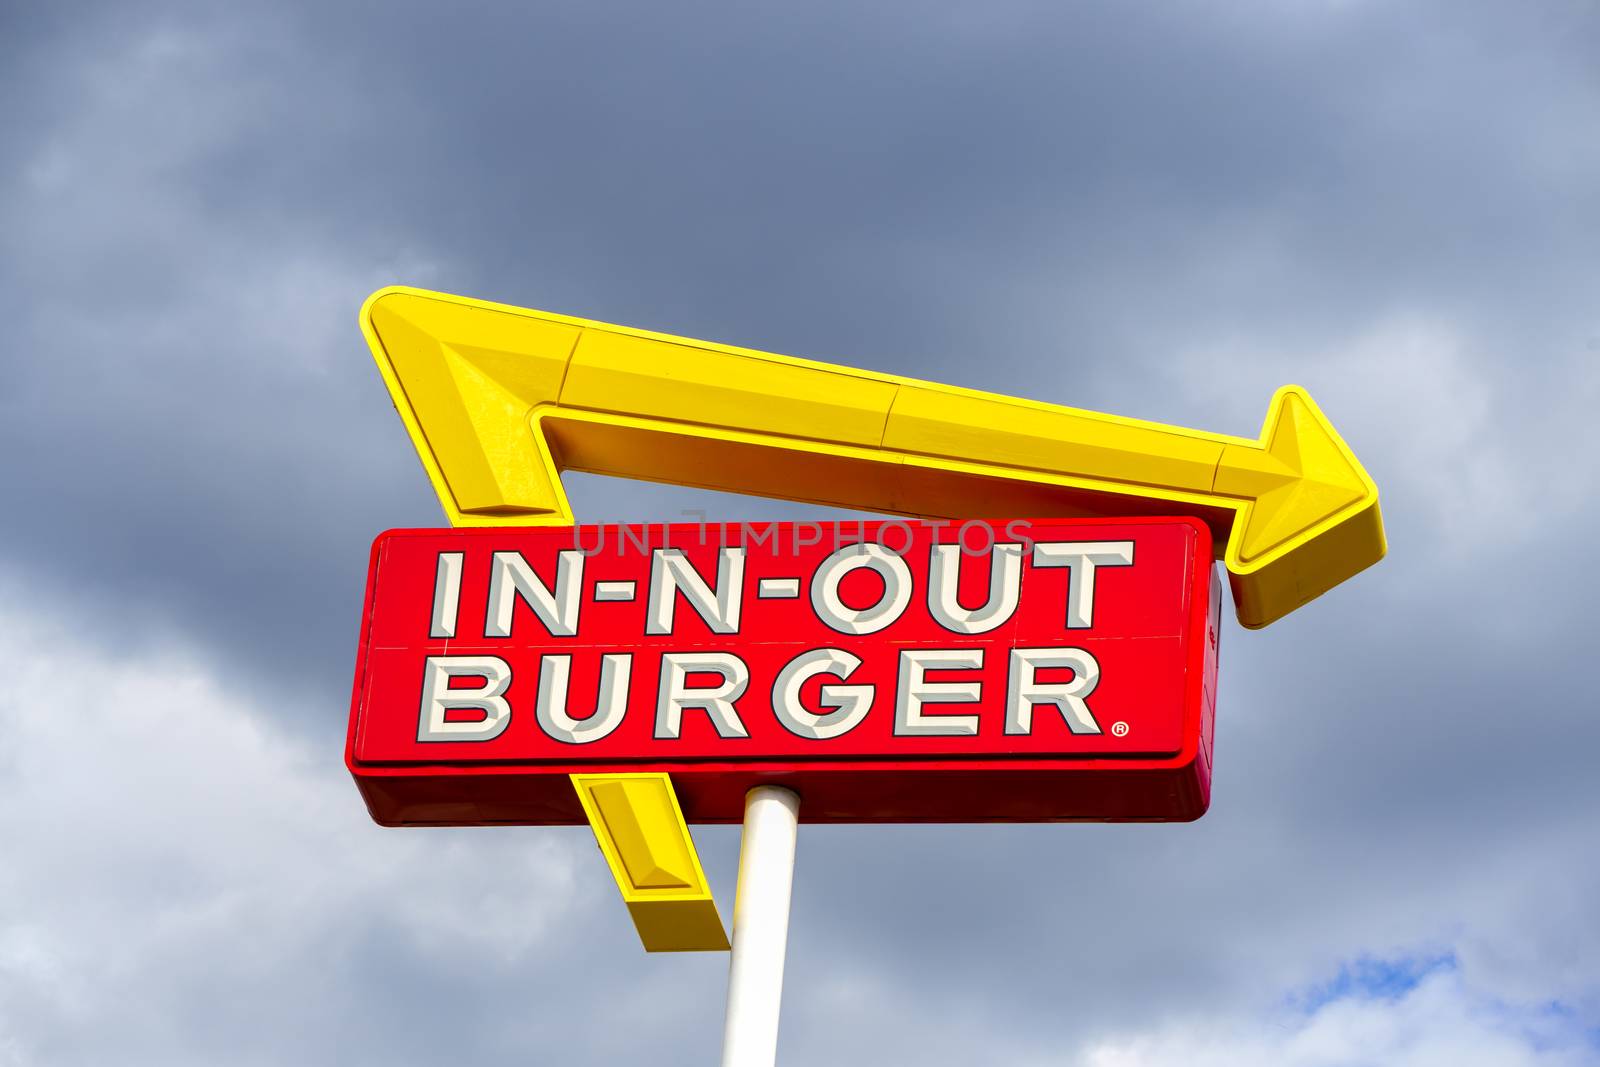 CANYON COUNTRY,CA/USA - OCTOBER 28, 2015: Exterior Sign of an In-N-Out Burger restauruant. In-N-Out Burgers, Inc. is a regional chain of fast food restaurants with locations the United States Southwest.